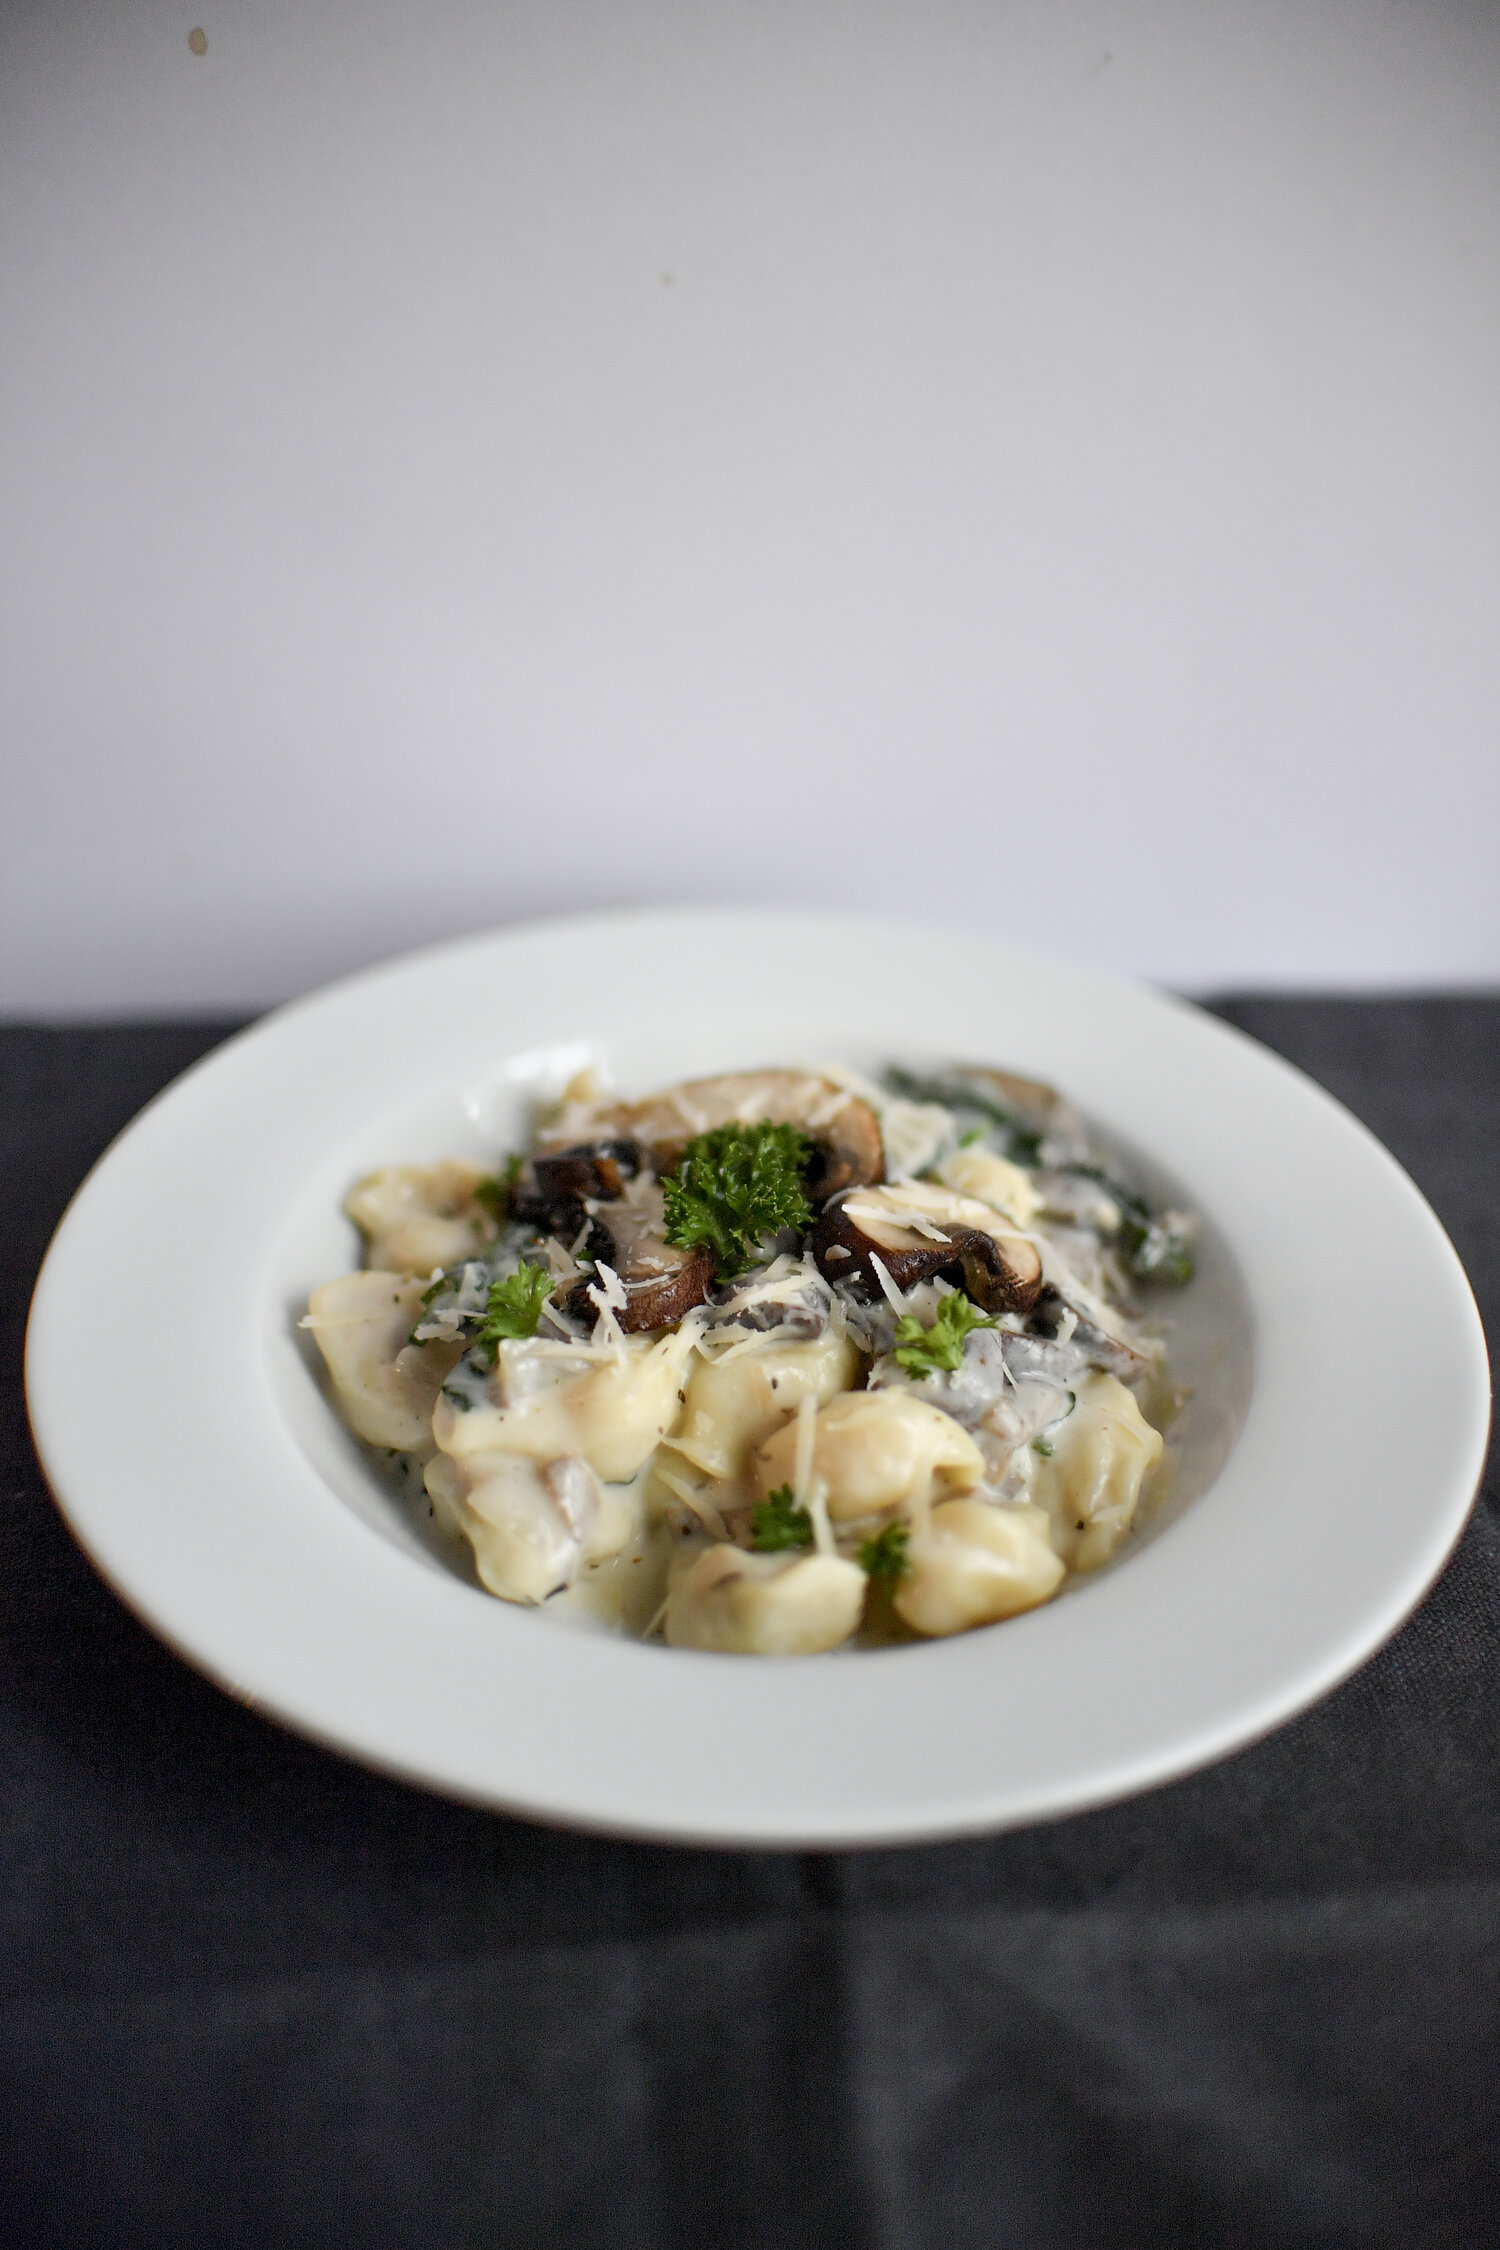 Creamy Asiago-Parmesan Tortellini with Spinach and Mushrooms